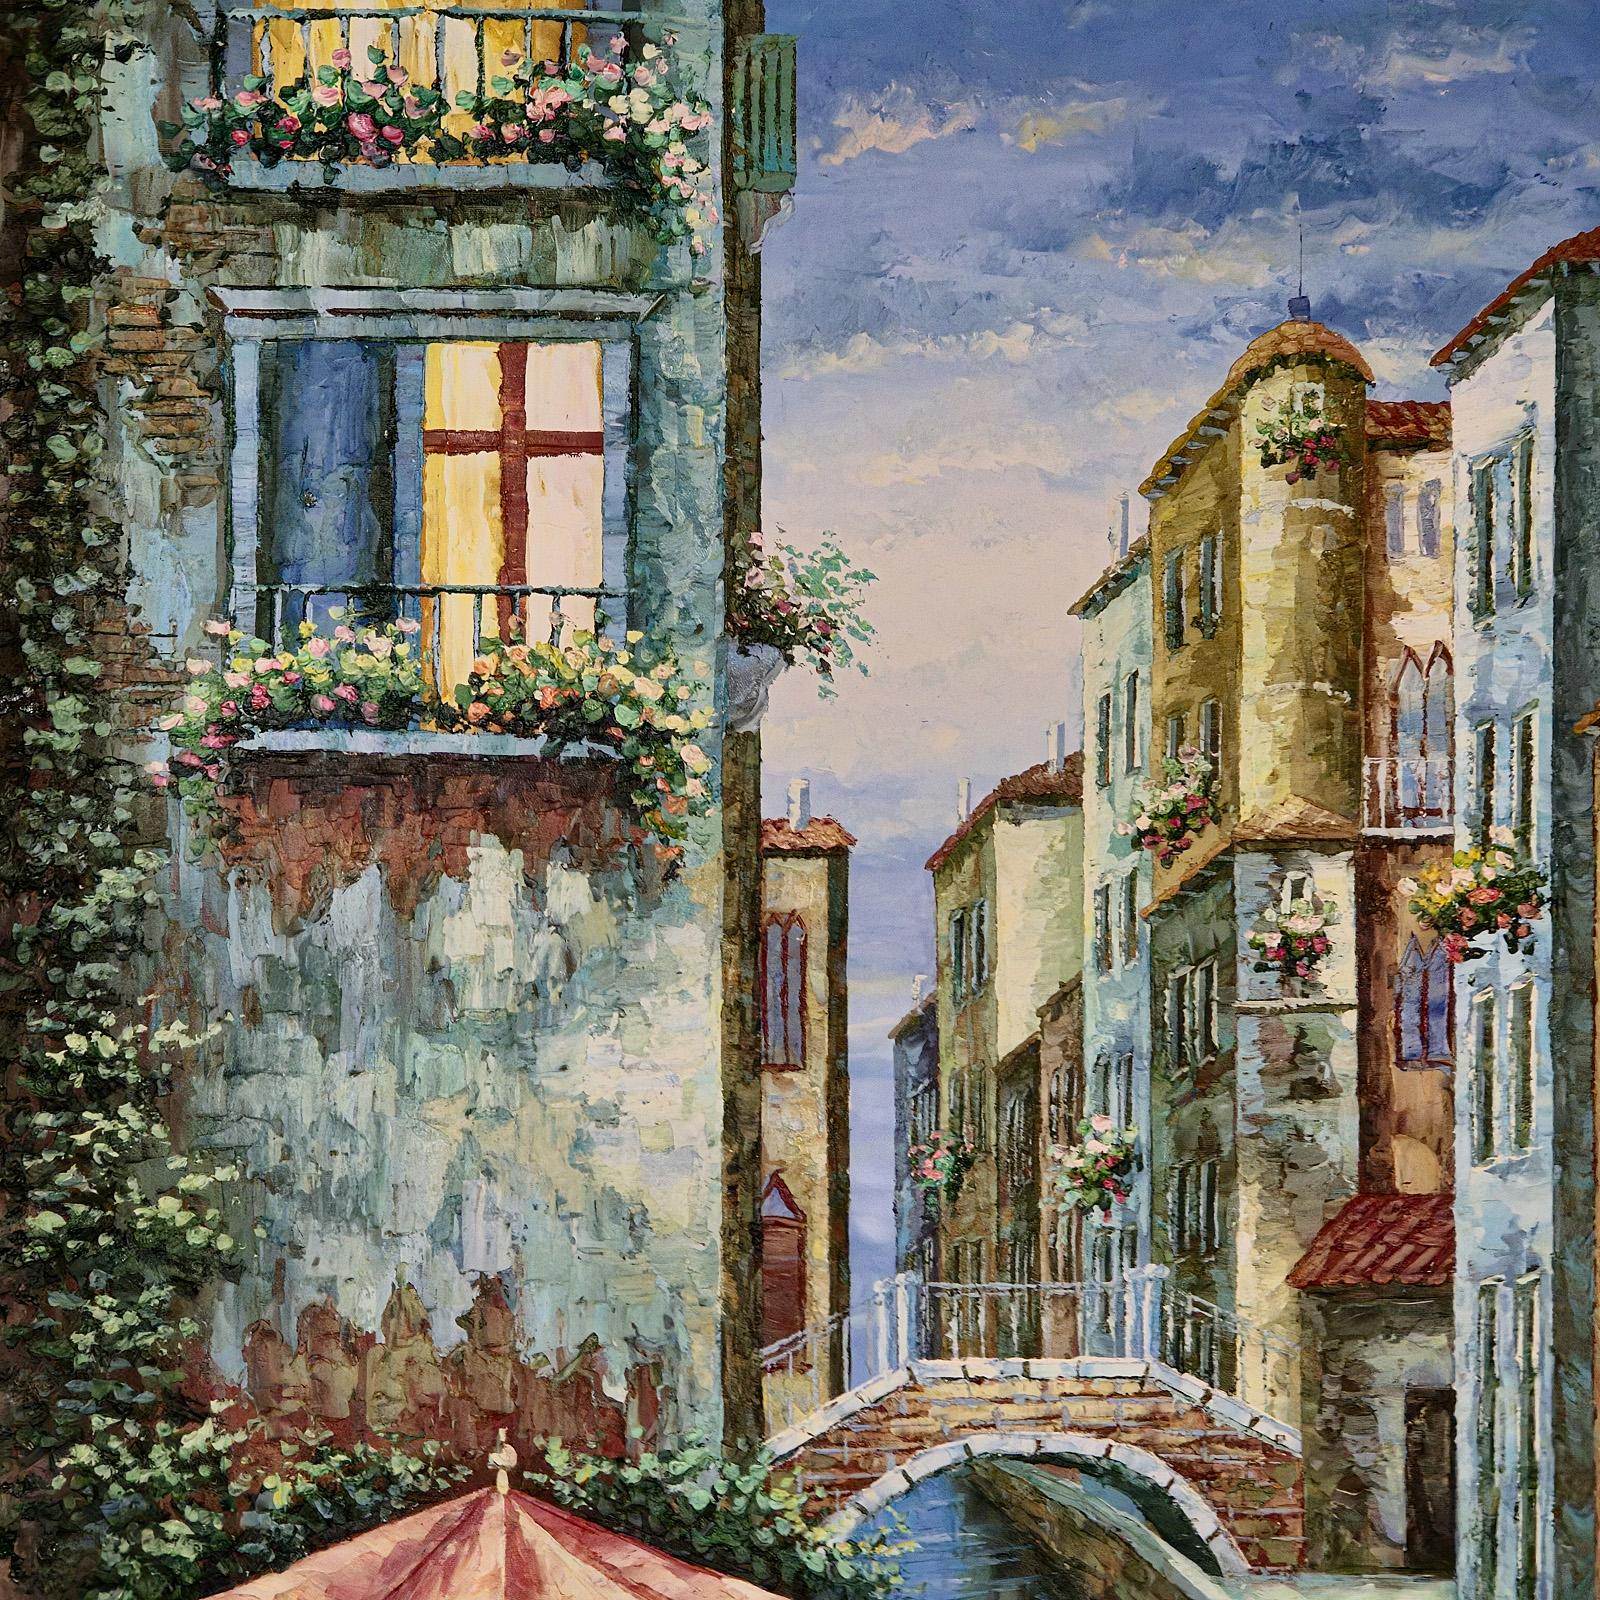 Large Vintage Oil on Canvas, Venice, Painting, Venetian Street Scene, Framed Art In Good Condition For Sale In Hele, Devon, GB